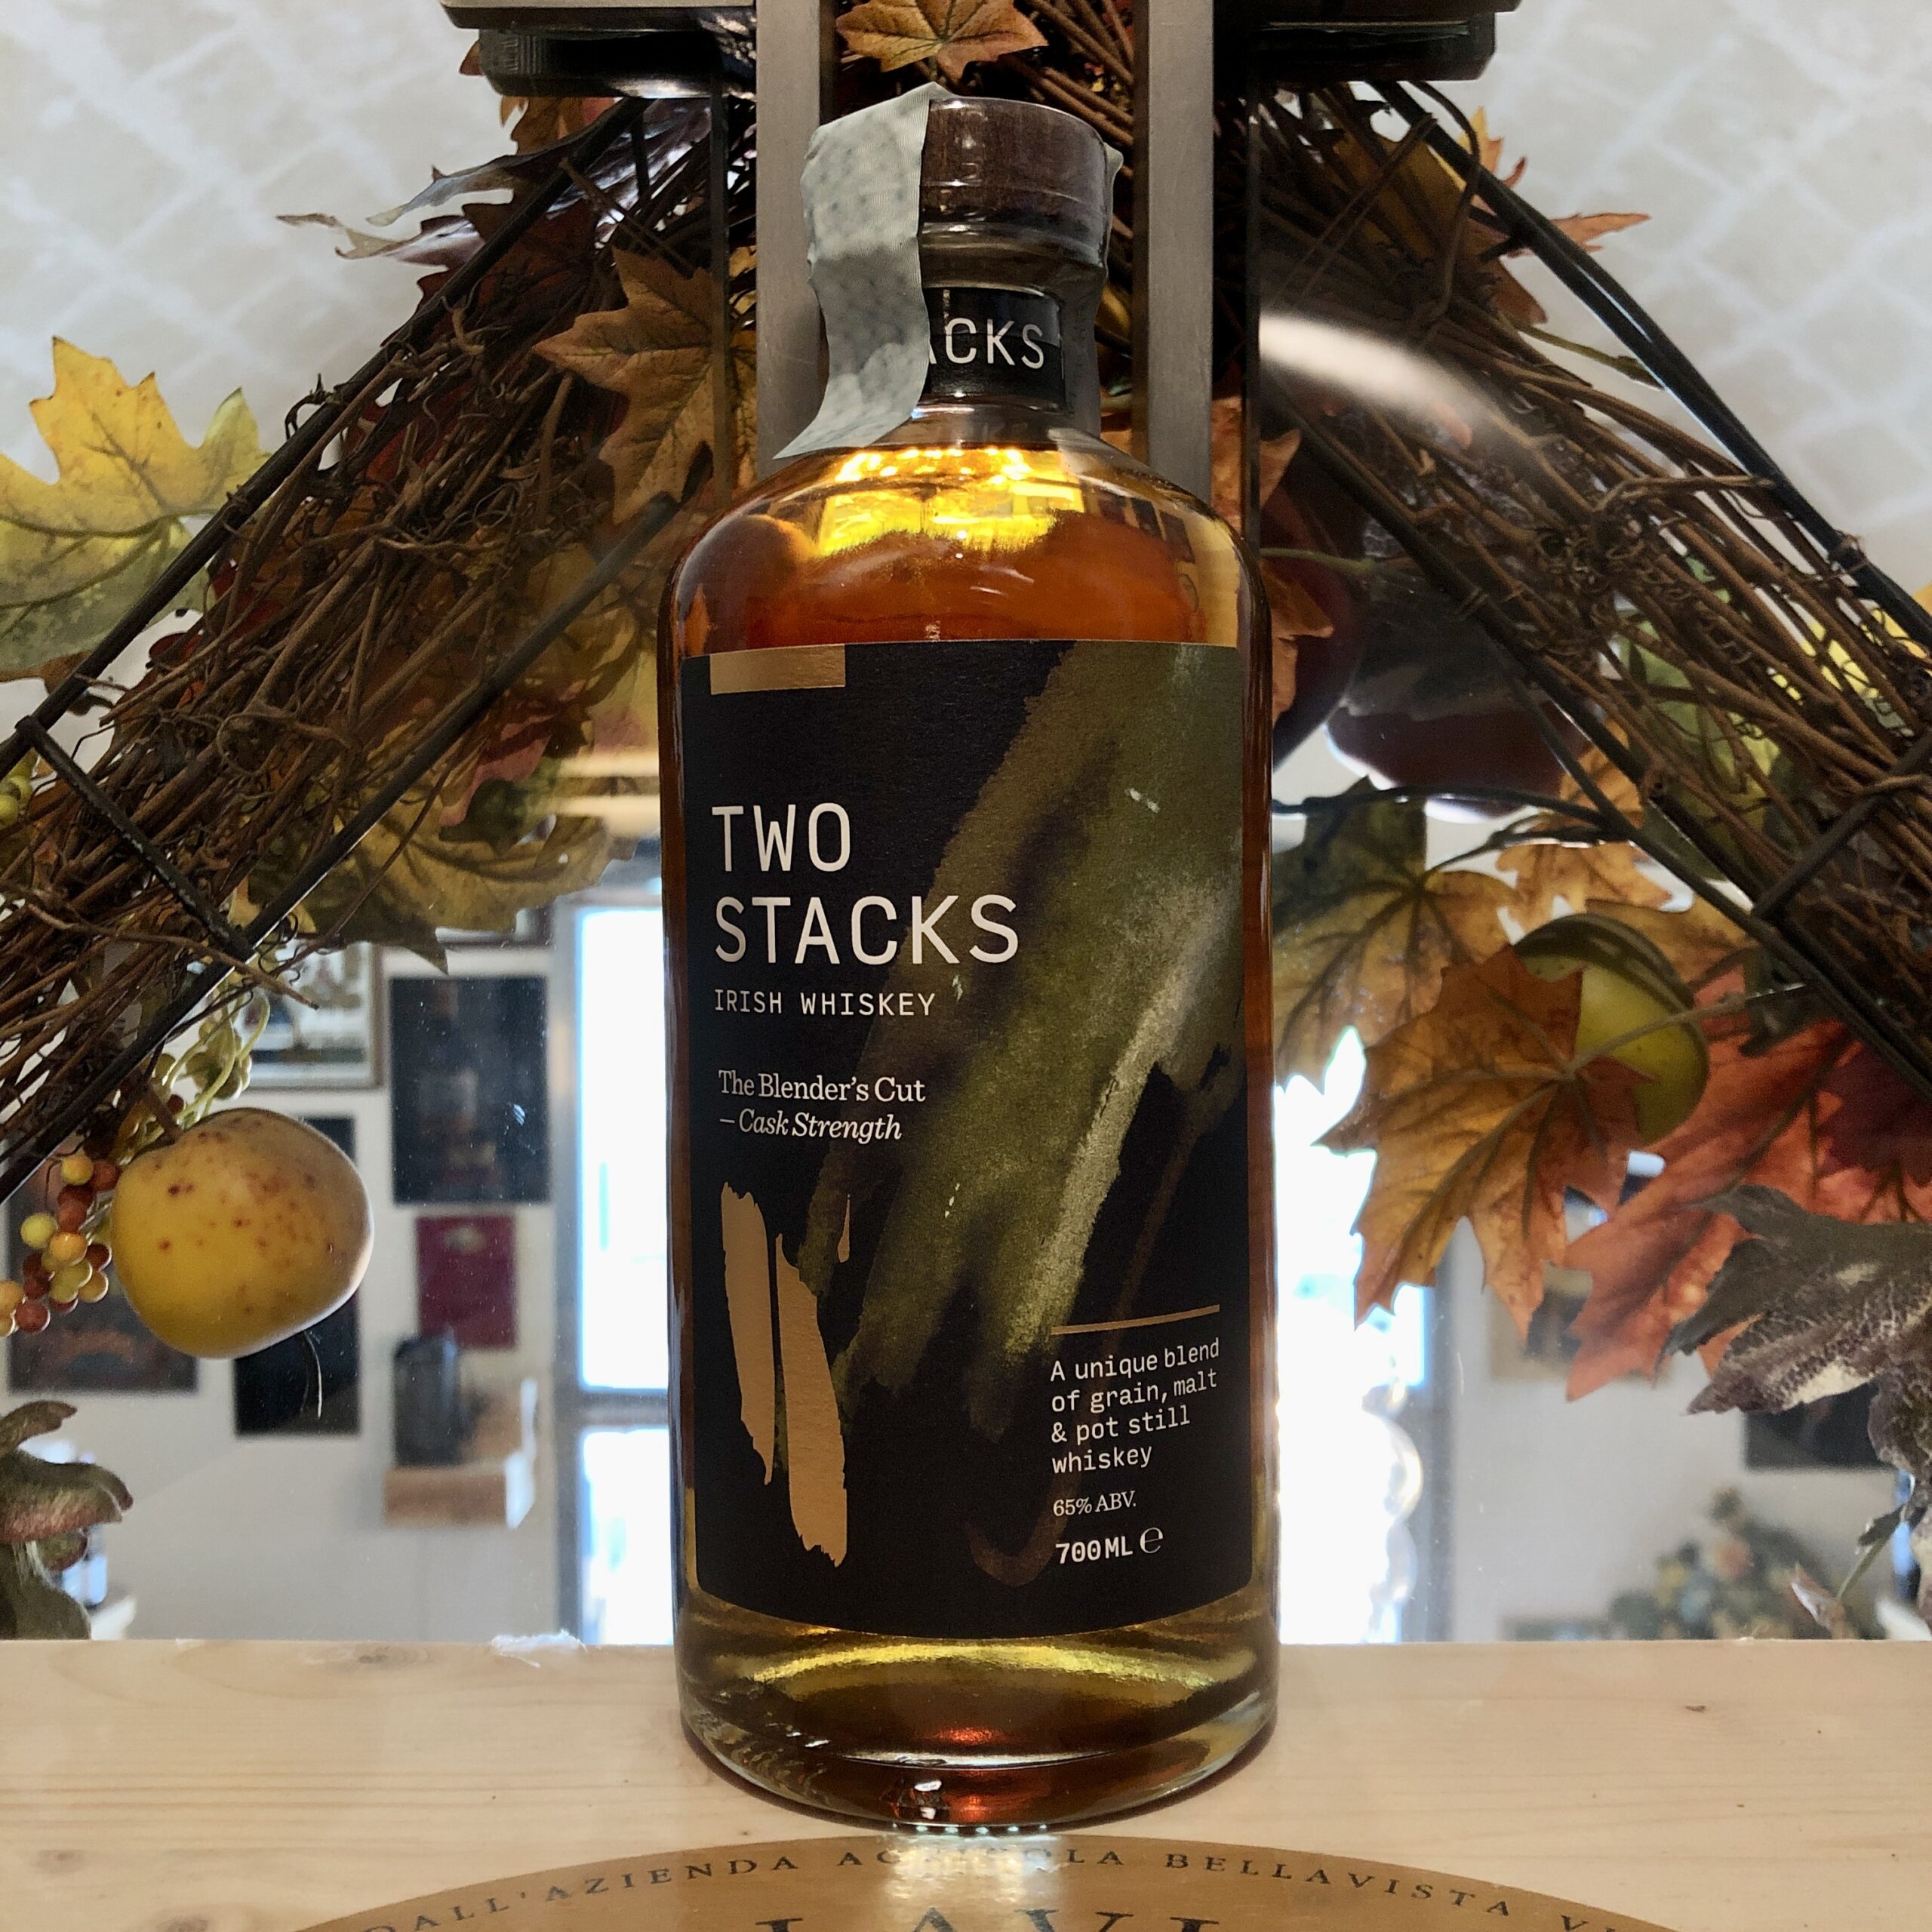 Two Stacks Irish Whiskey The Blender’s Cut – Cask Strenght